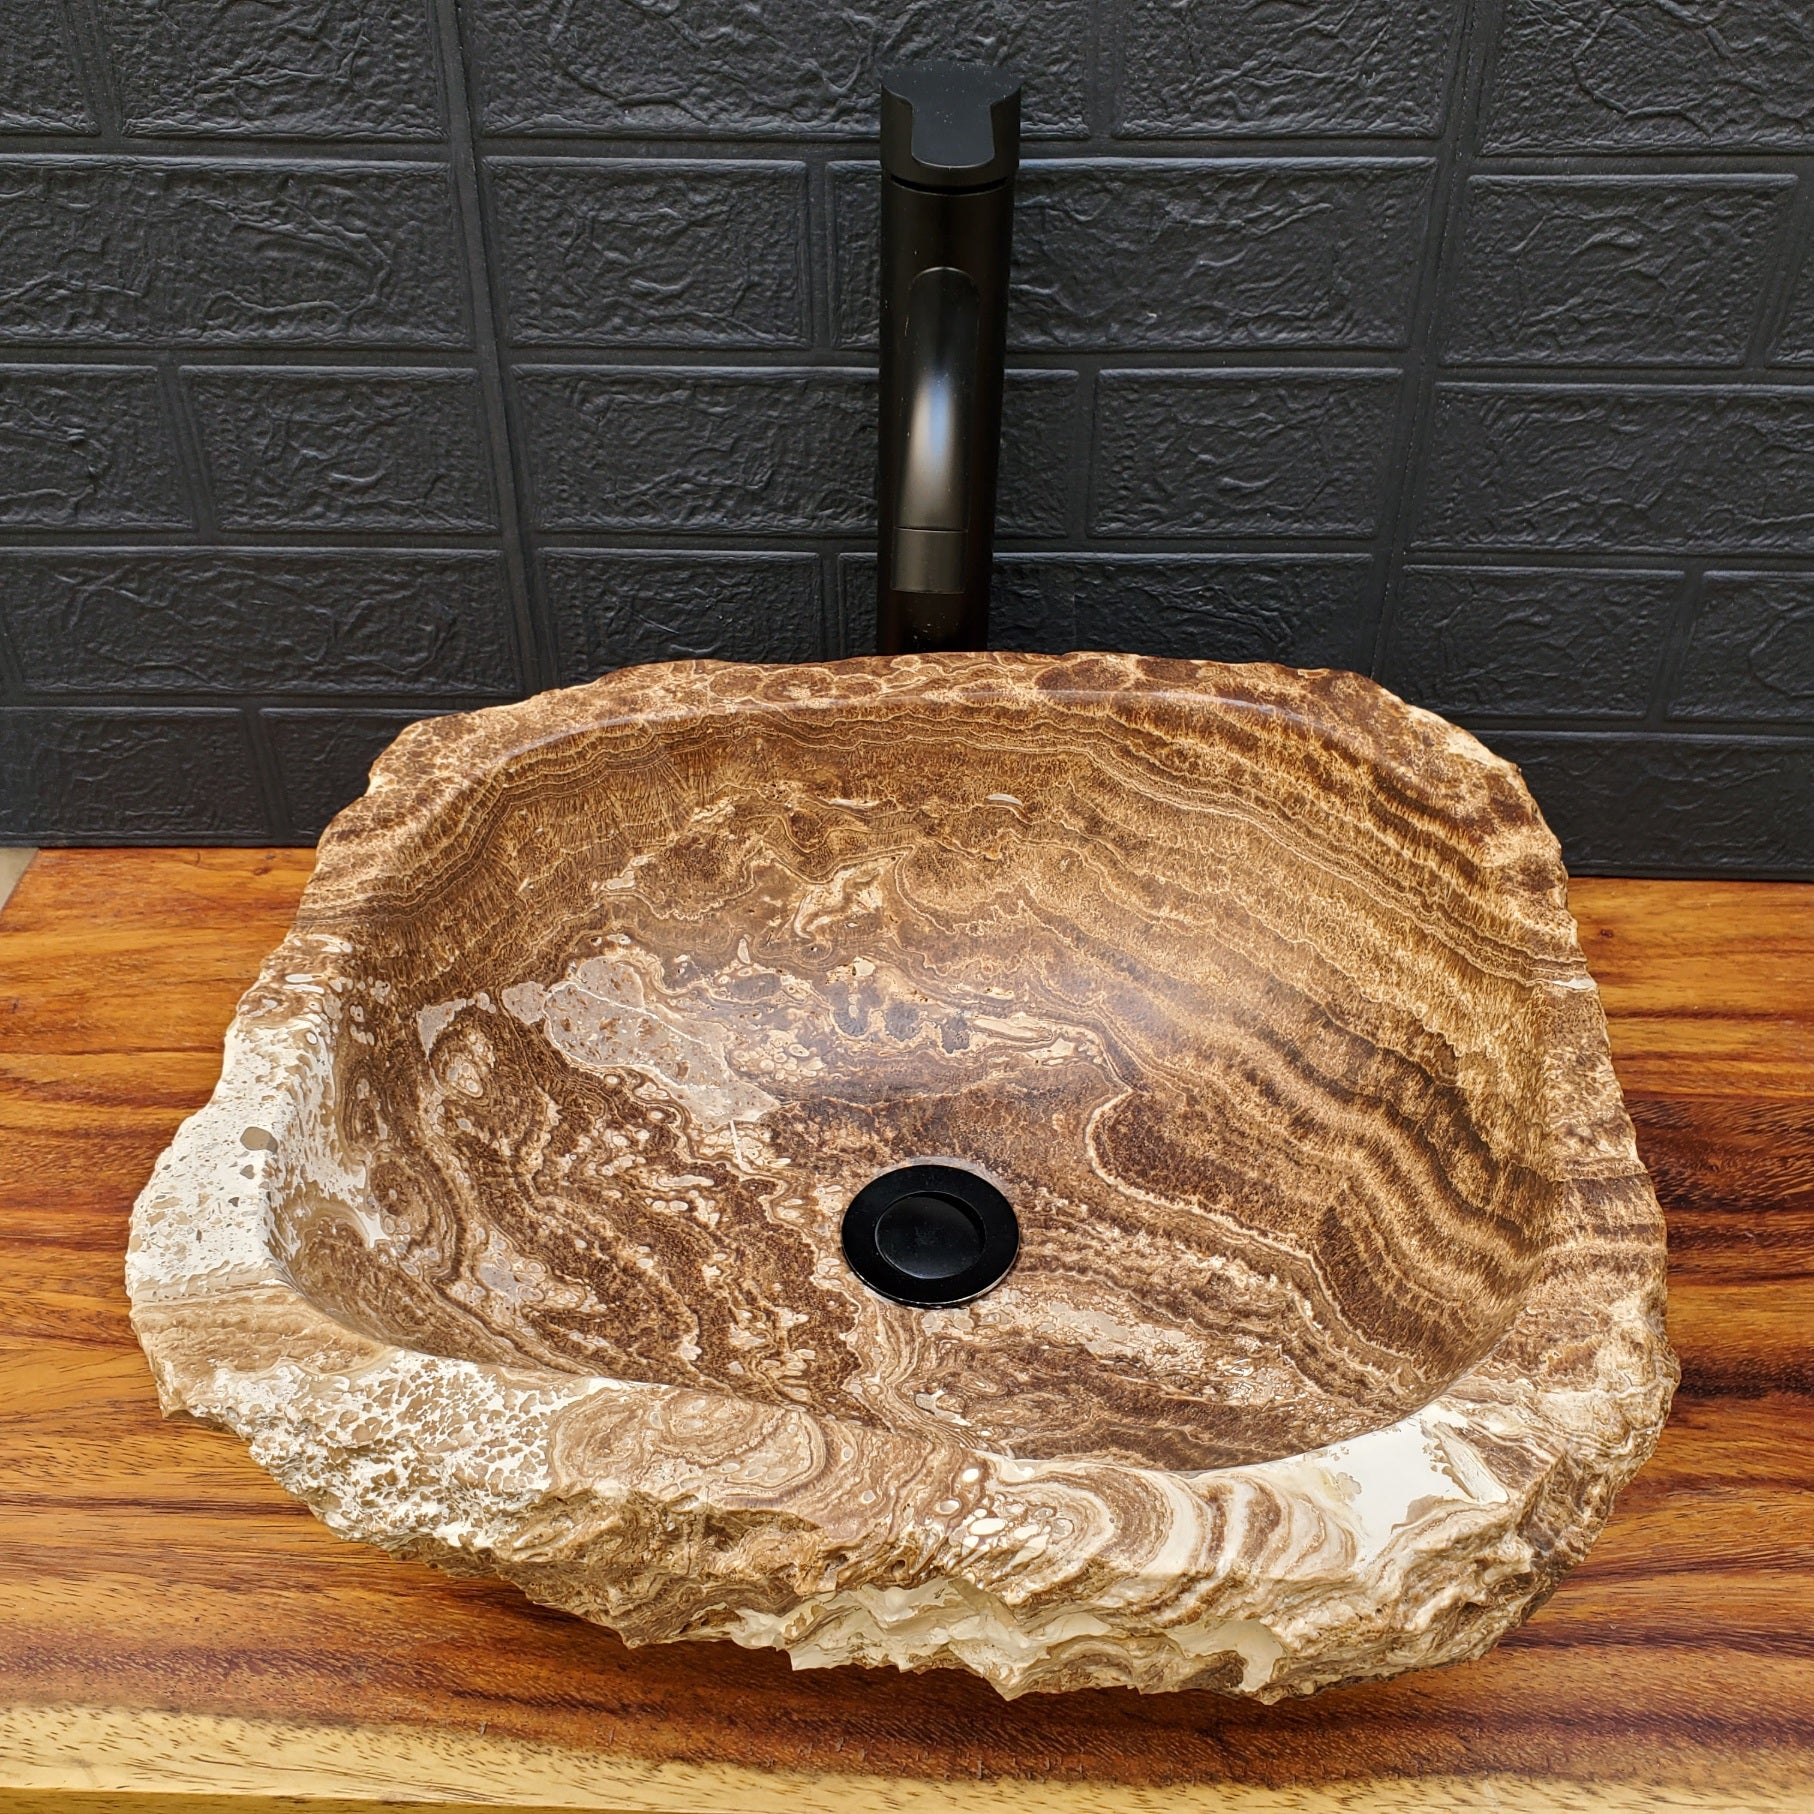 Square small onyx stone vessel sink. Handmade in Mexico. Hand finished and ships from the USA. Buy now at www.felipeandgrace.com. 